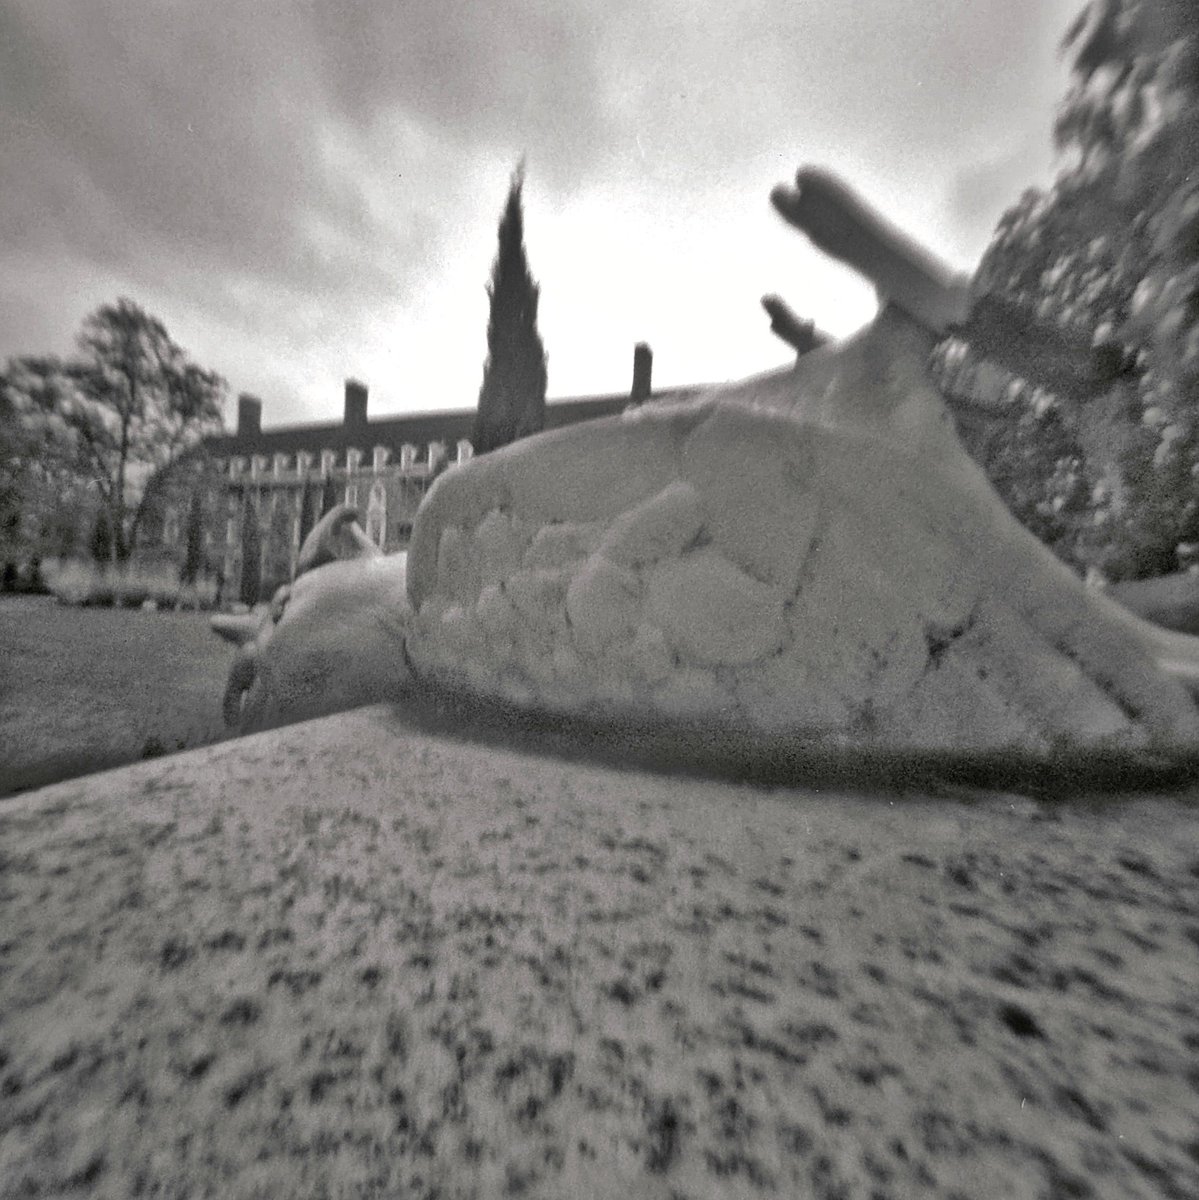 flaneuronthestreets.substack.com/p/world-pinhol… Pinhole day, a day early.